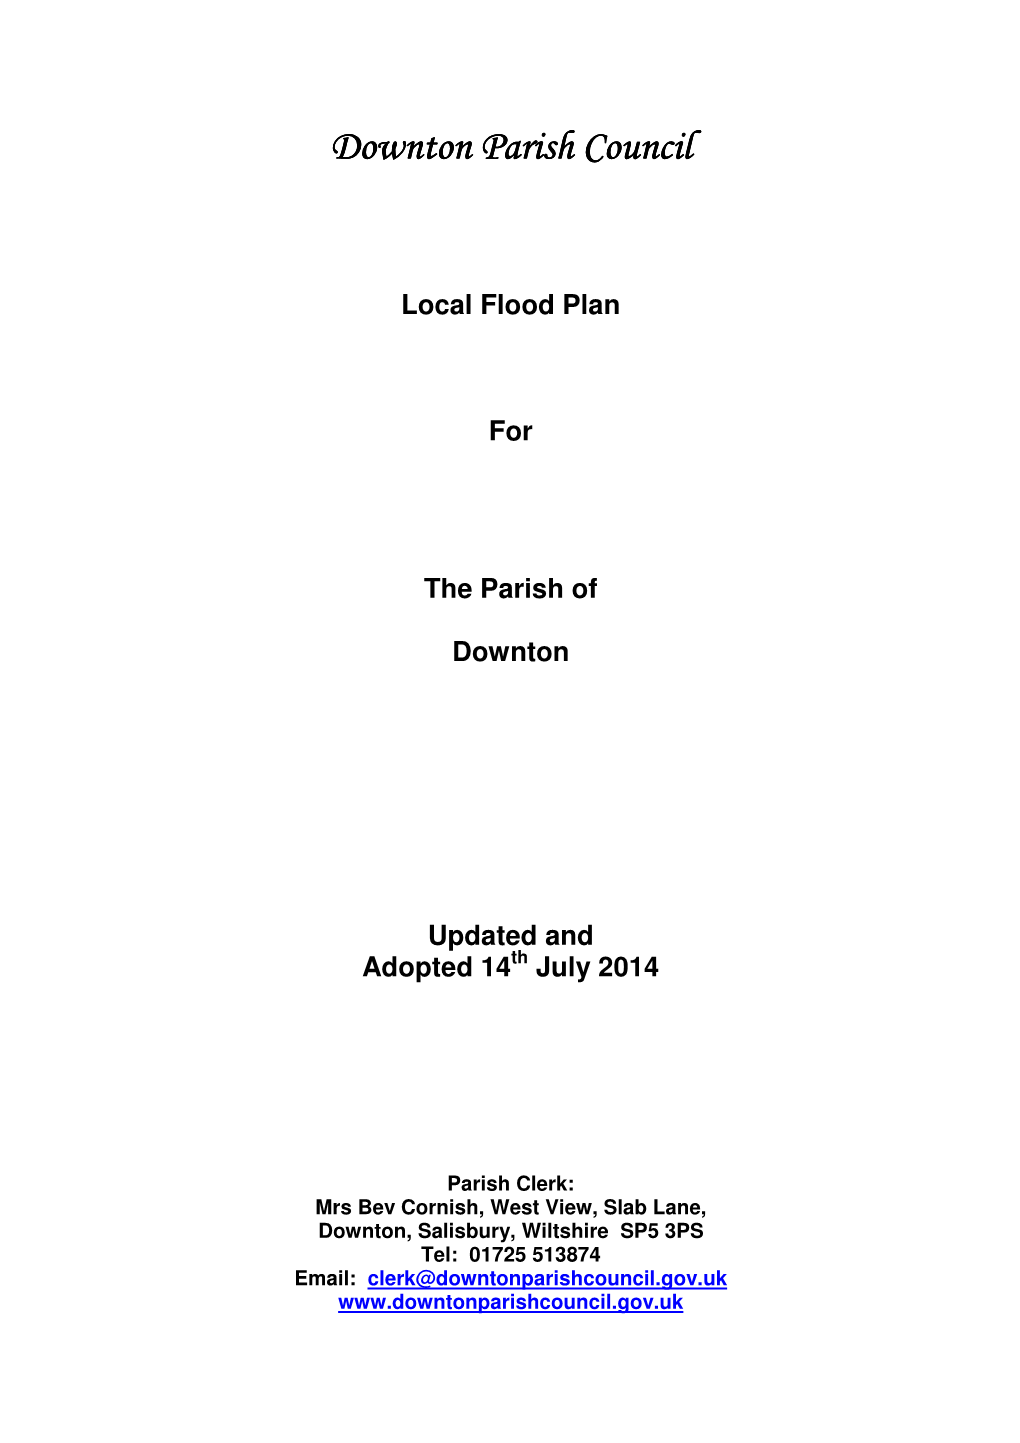 Local Flood Plan for the Parish of Downton Updated and Adopted 14